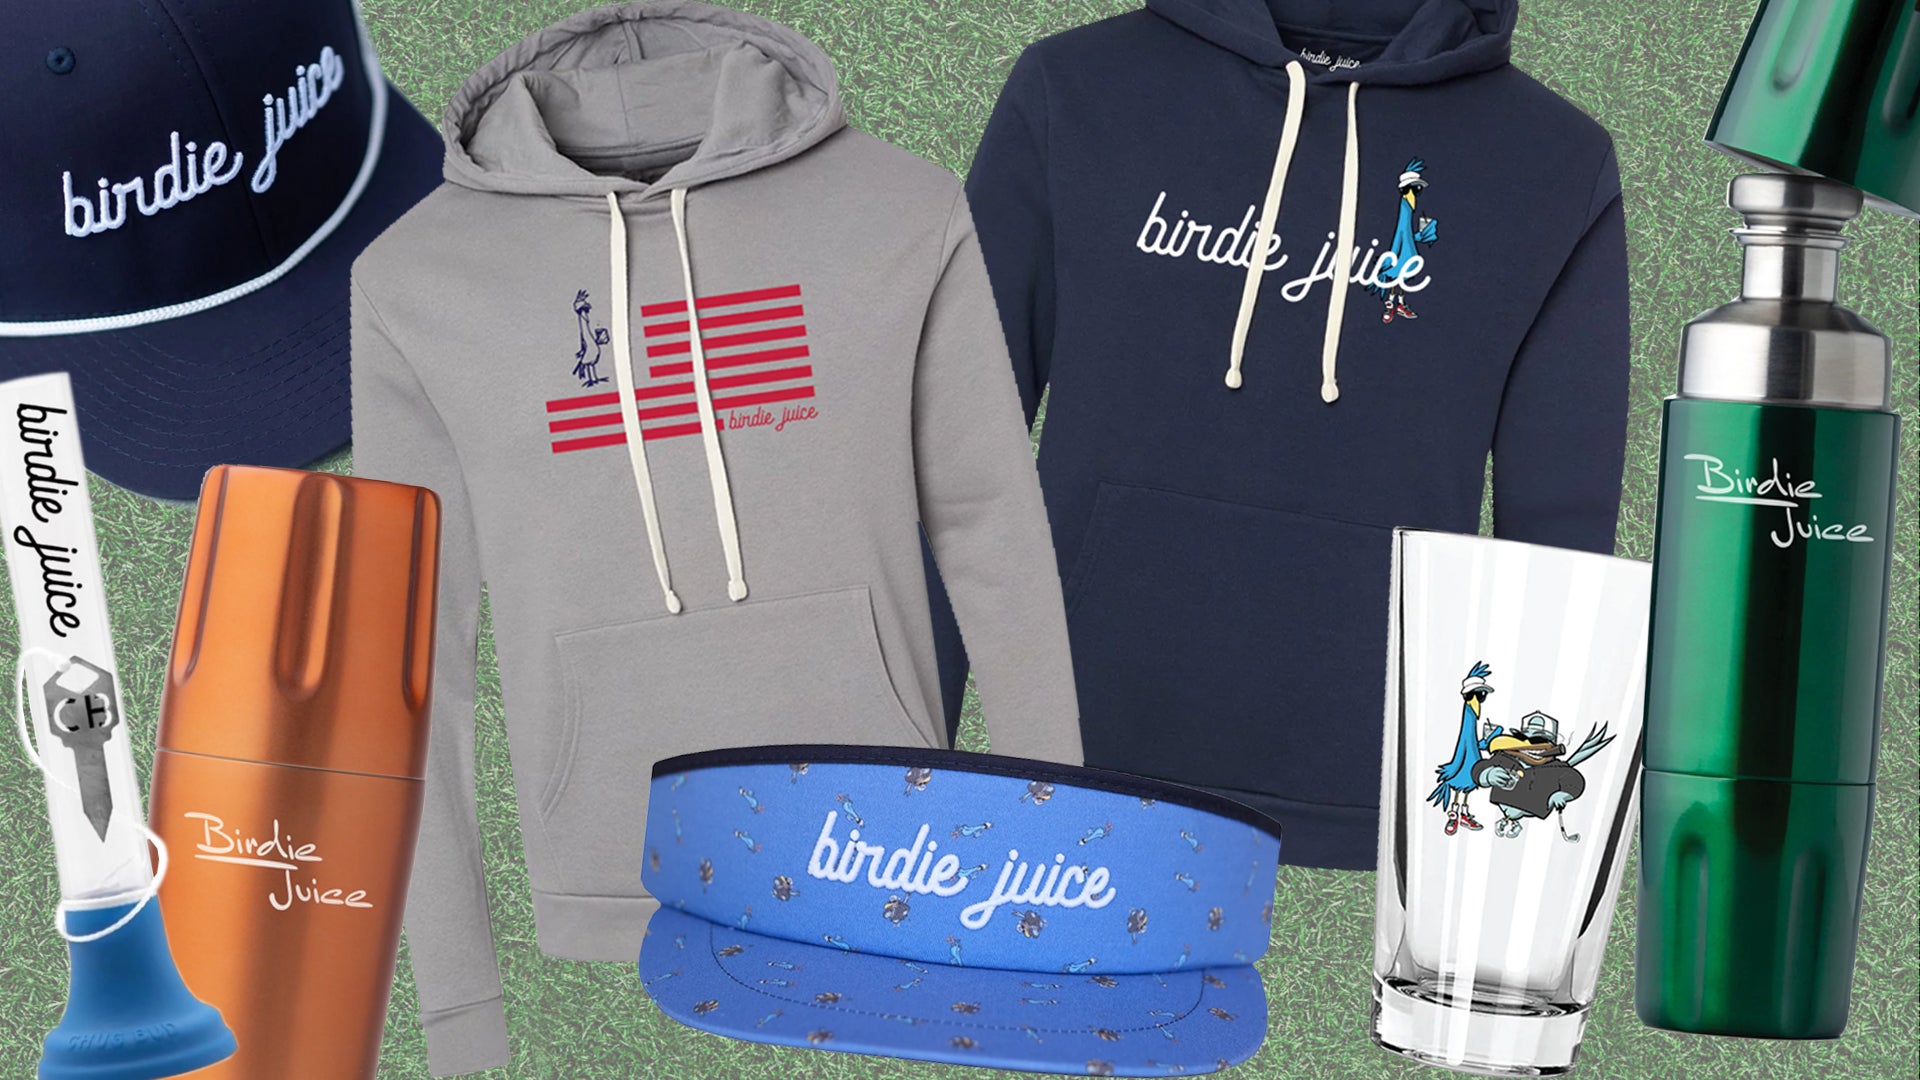 From now until February 12th, the entire Birdie Juice Collection is 20% off in GOLF's Pro Shop. Why? To help you join the WM Phoenix Open fun, of course! Birdie Juice's very own Colt Knost will be on the 16th hole announcing for CBS. Hole 16 is the most exciting hole on the PGA TOUR. It's also known as "The Greatest Show on Grass."